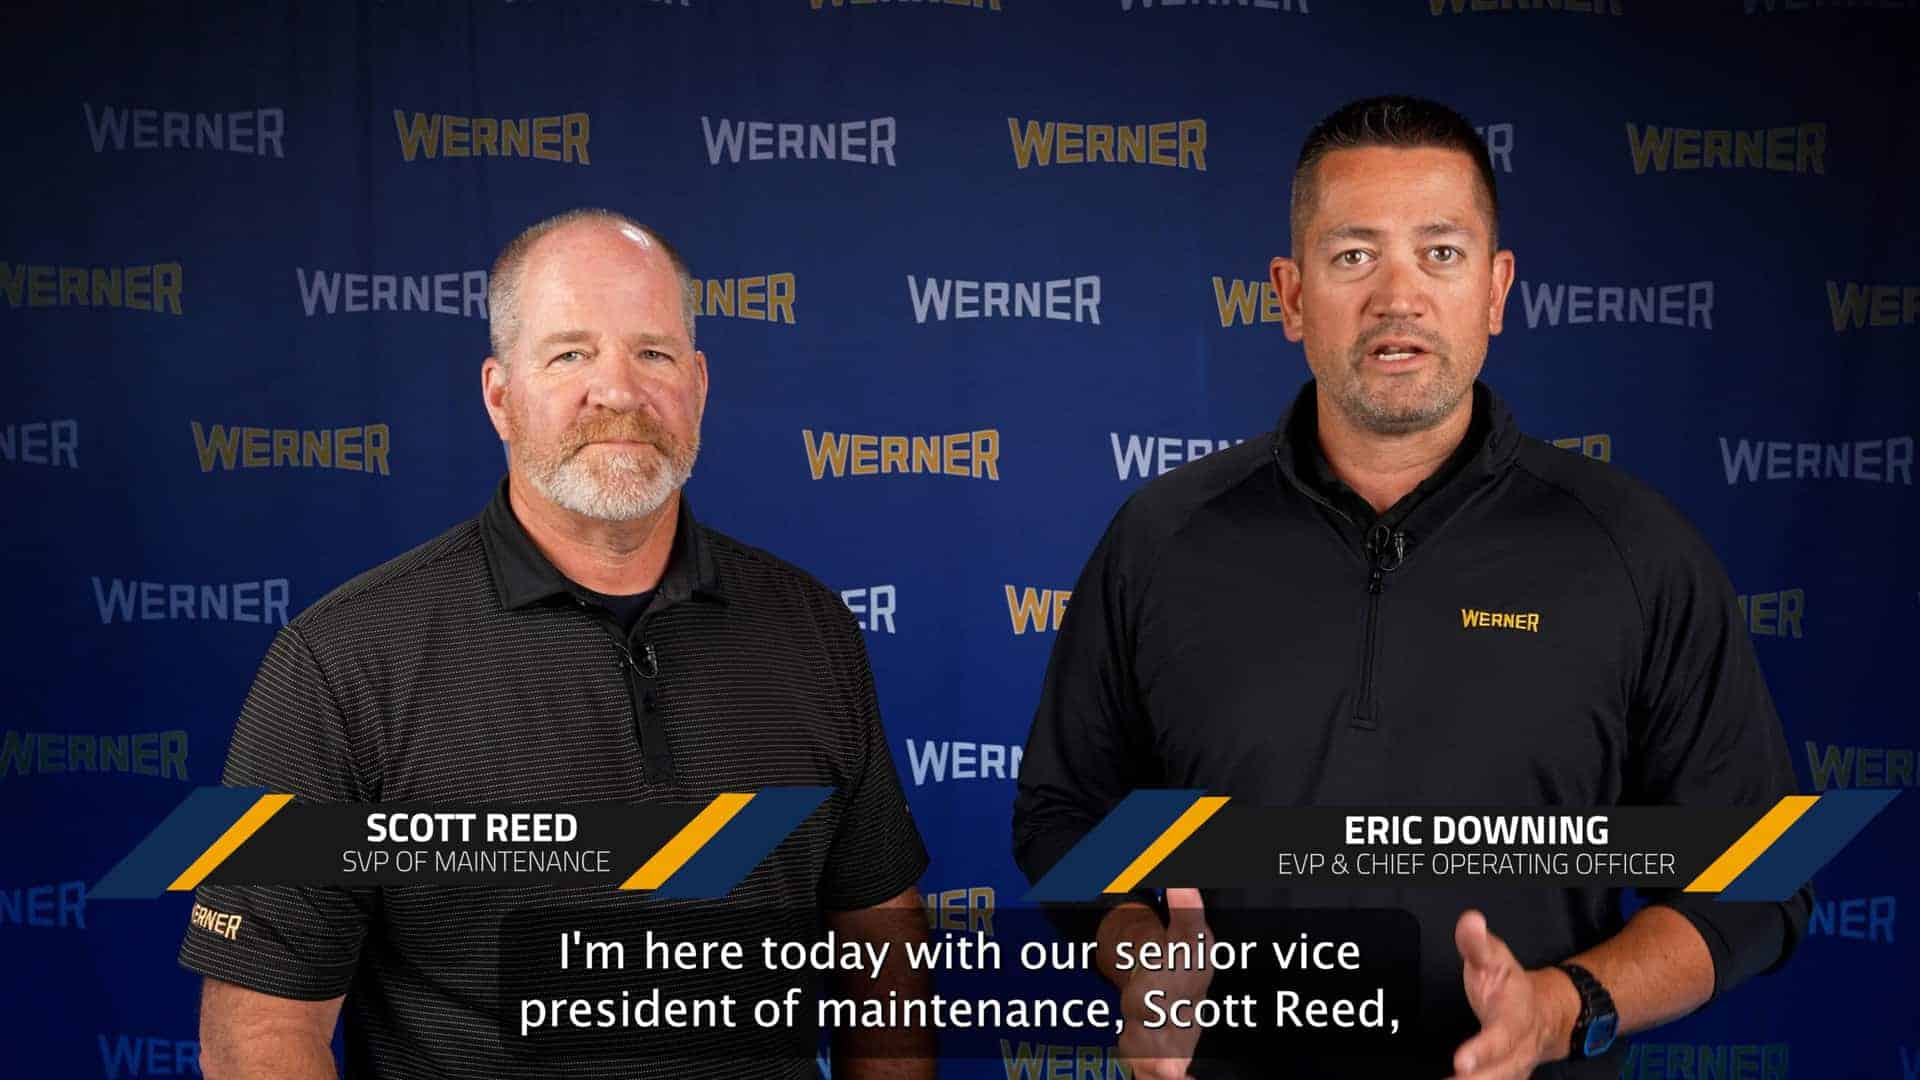 Scott Reed and Eric Downing of Werner talking